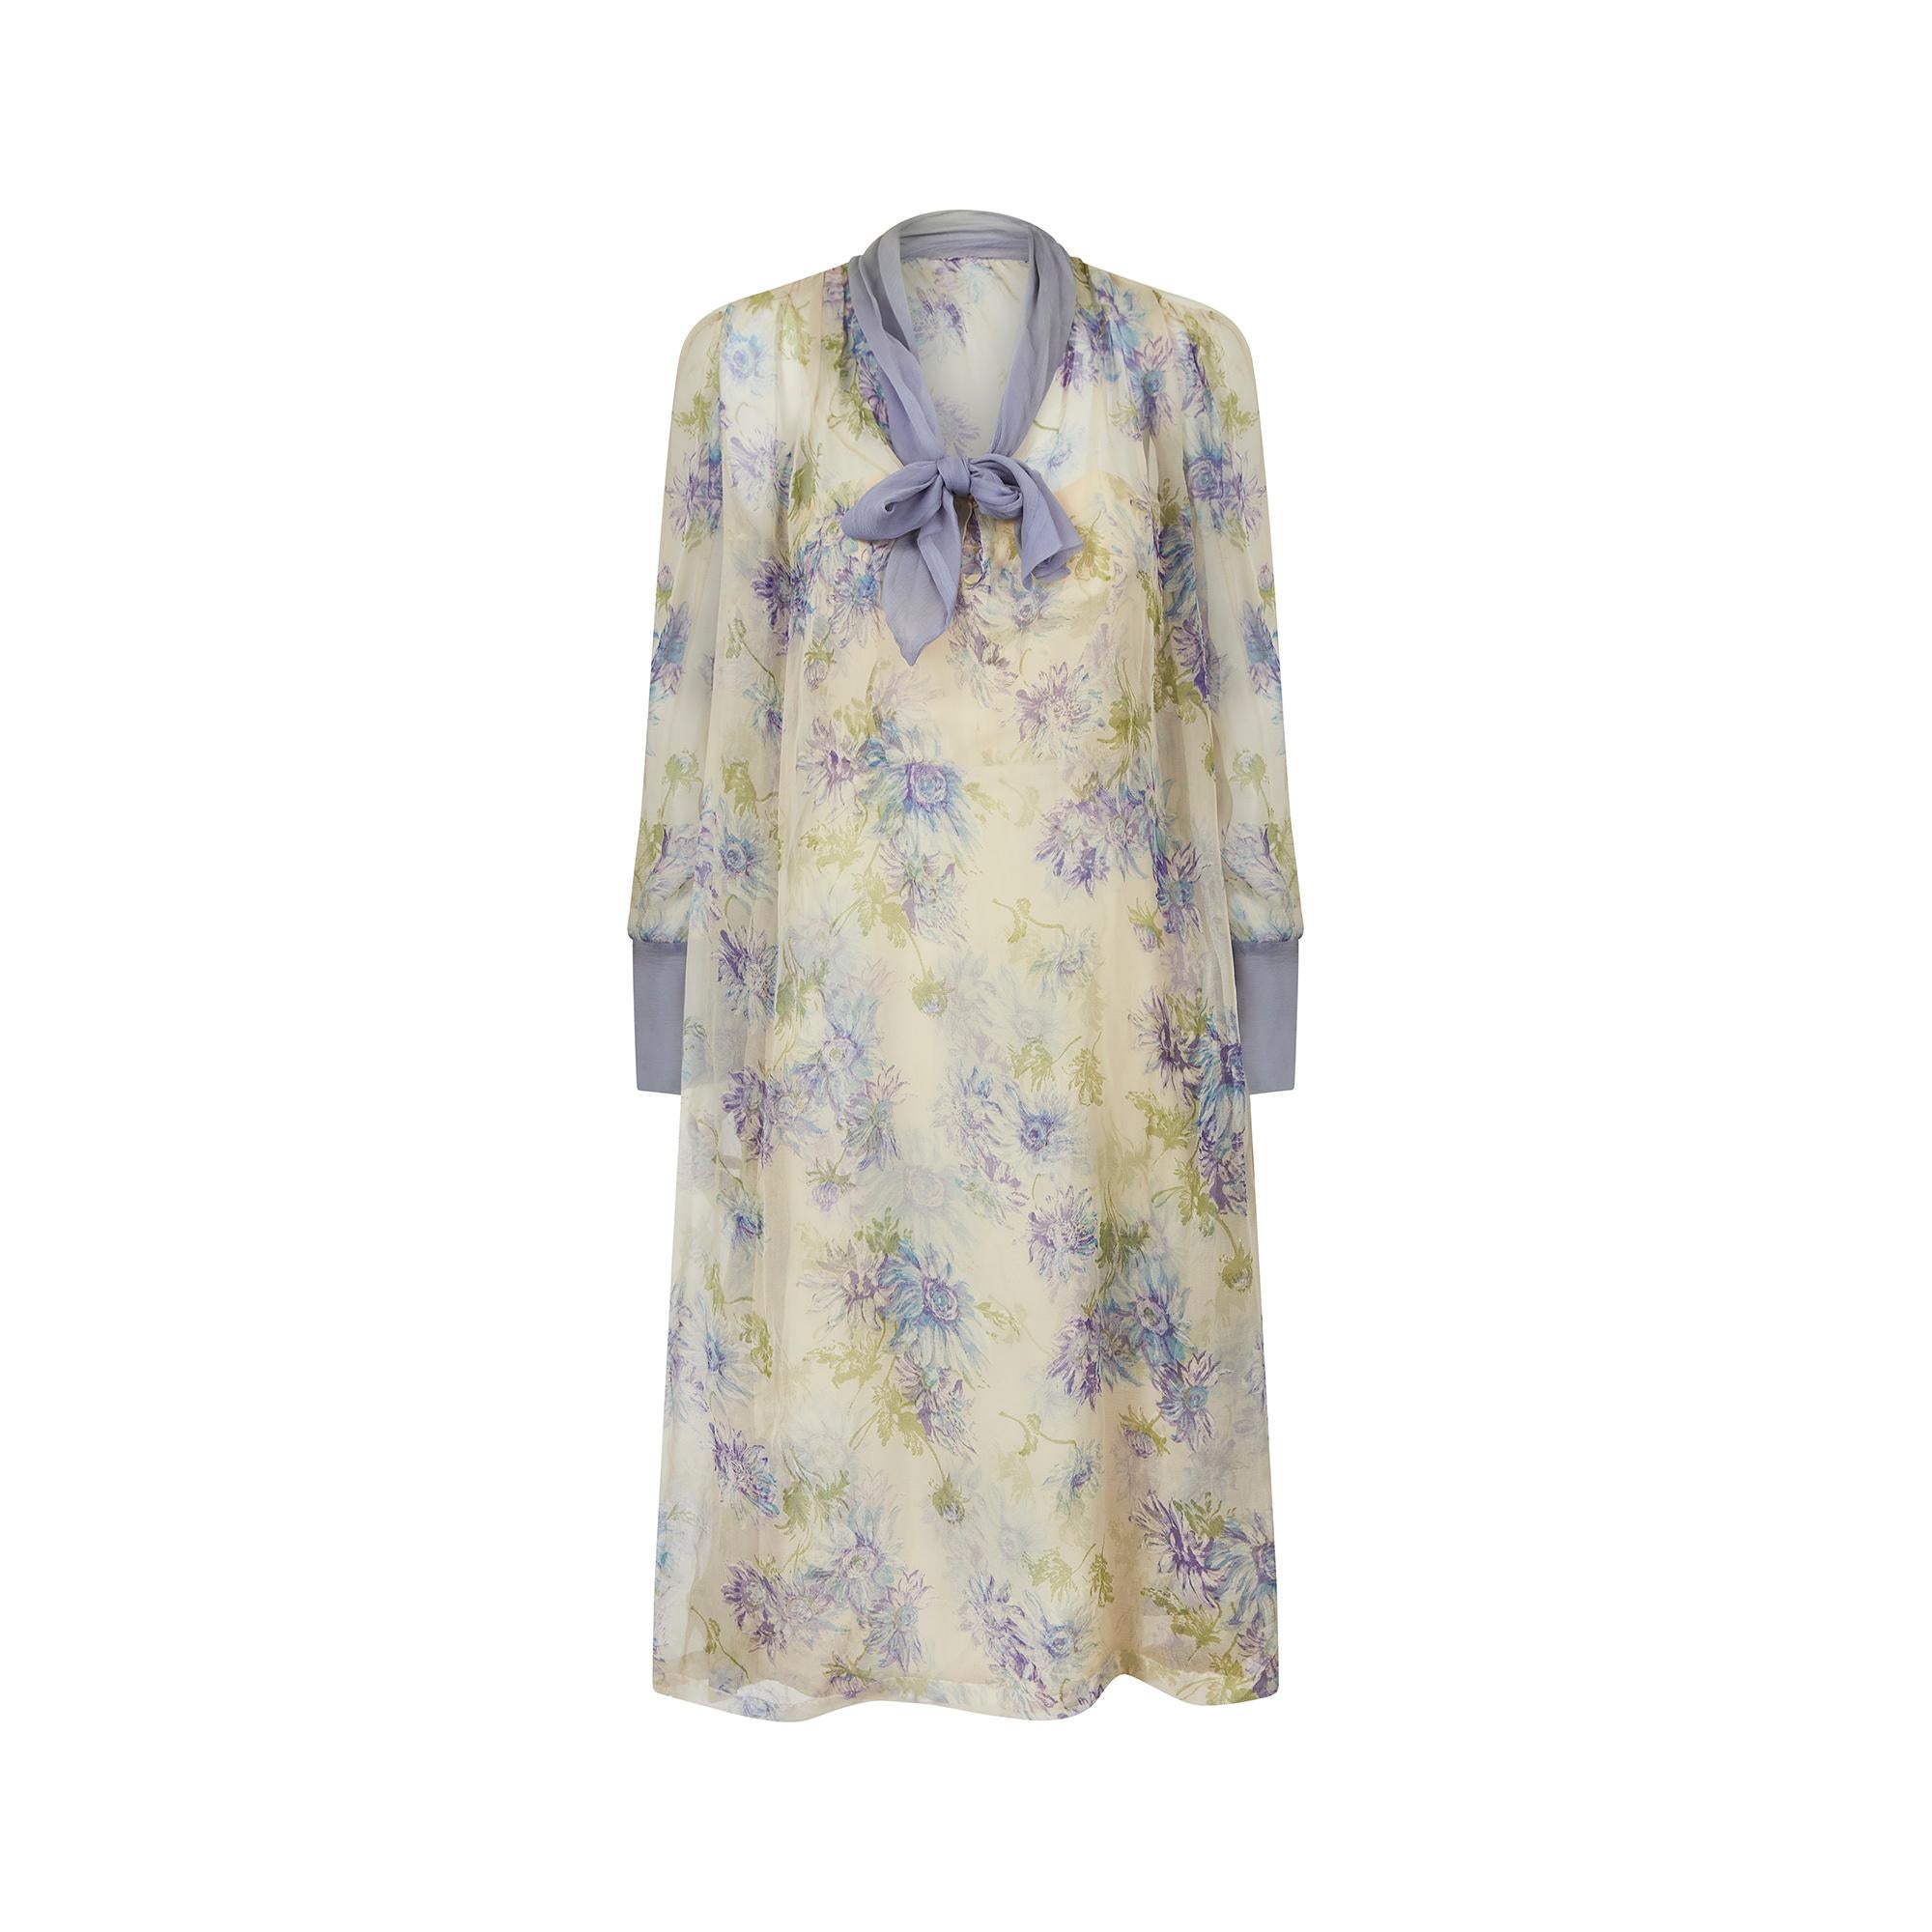 This is a beautifully feminine, early 1960s silk floral print dress ensemble and perfect for more formal occasions. The outer layer is crafted in a loose, shift like shape complete with attached lilac tie scarf and cuffs.  It slips on over the head